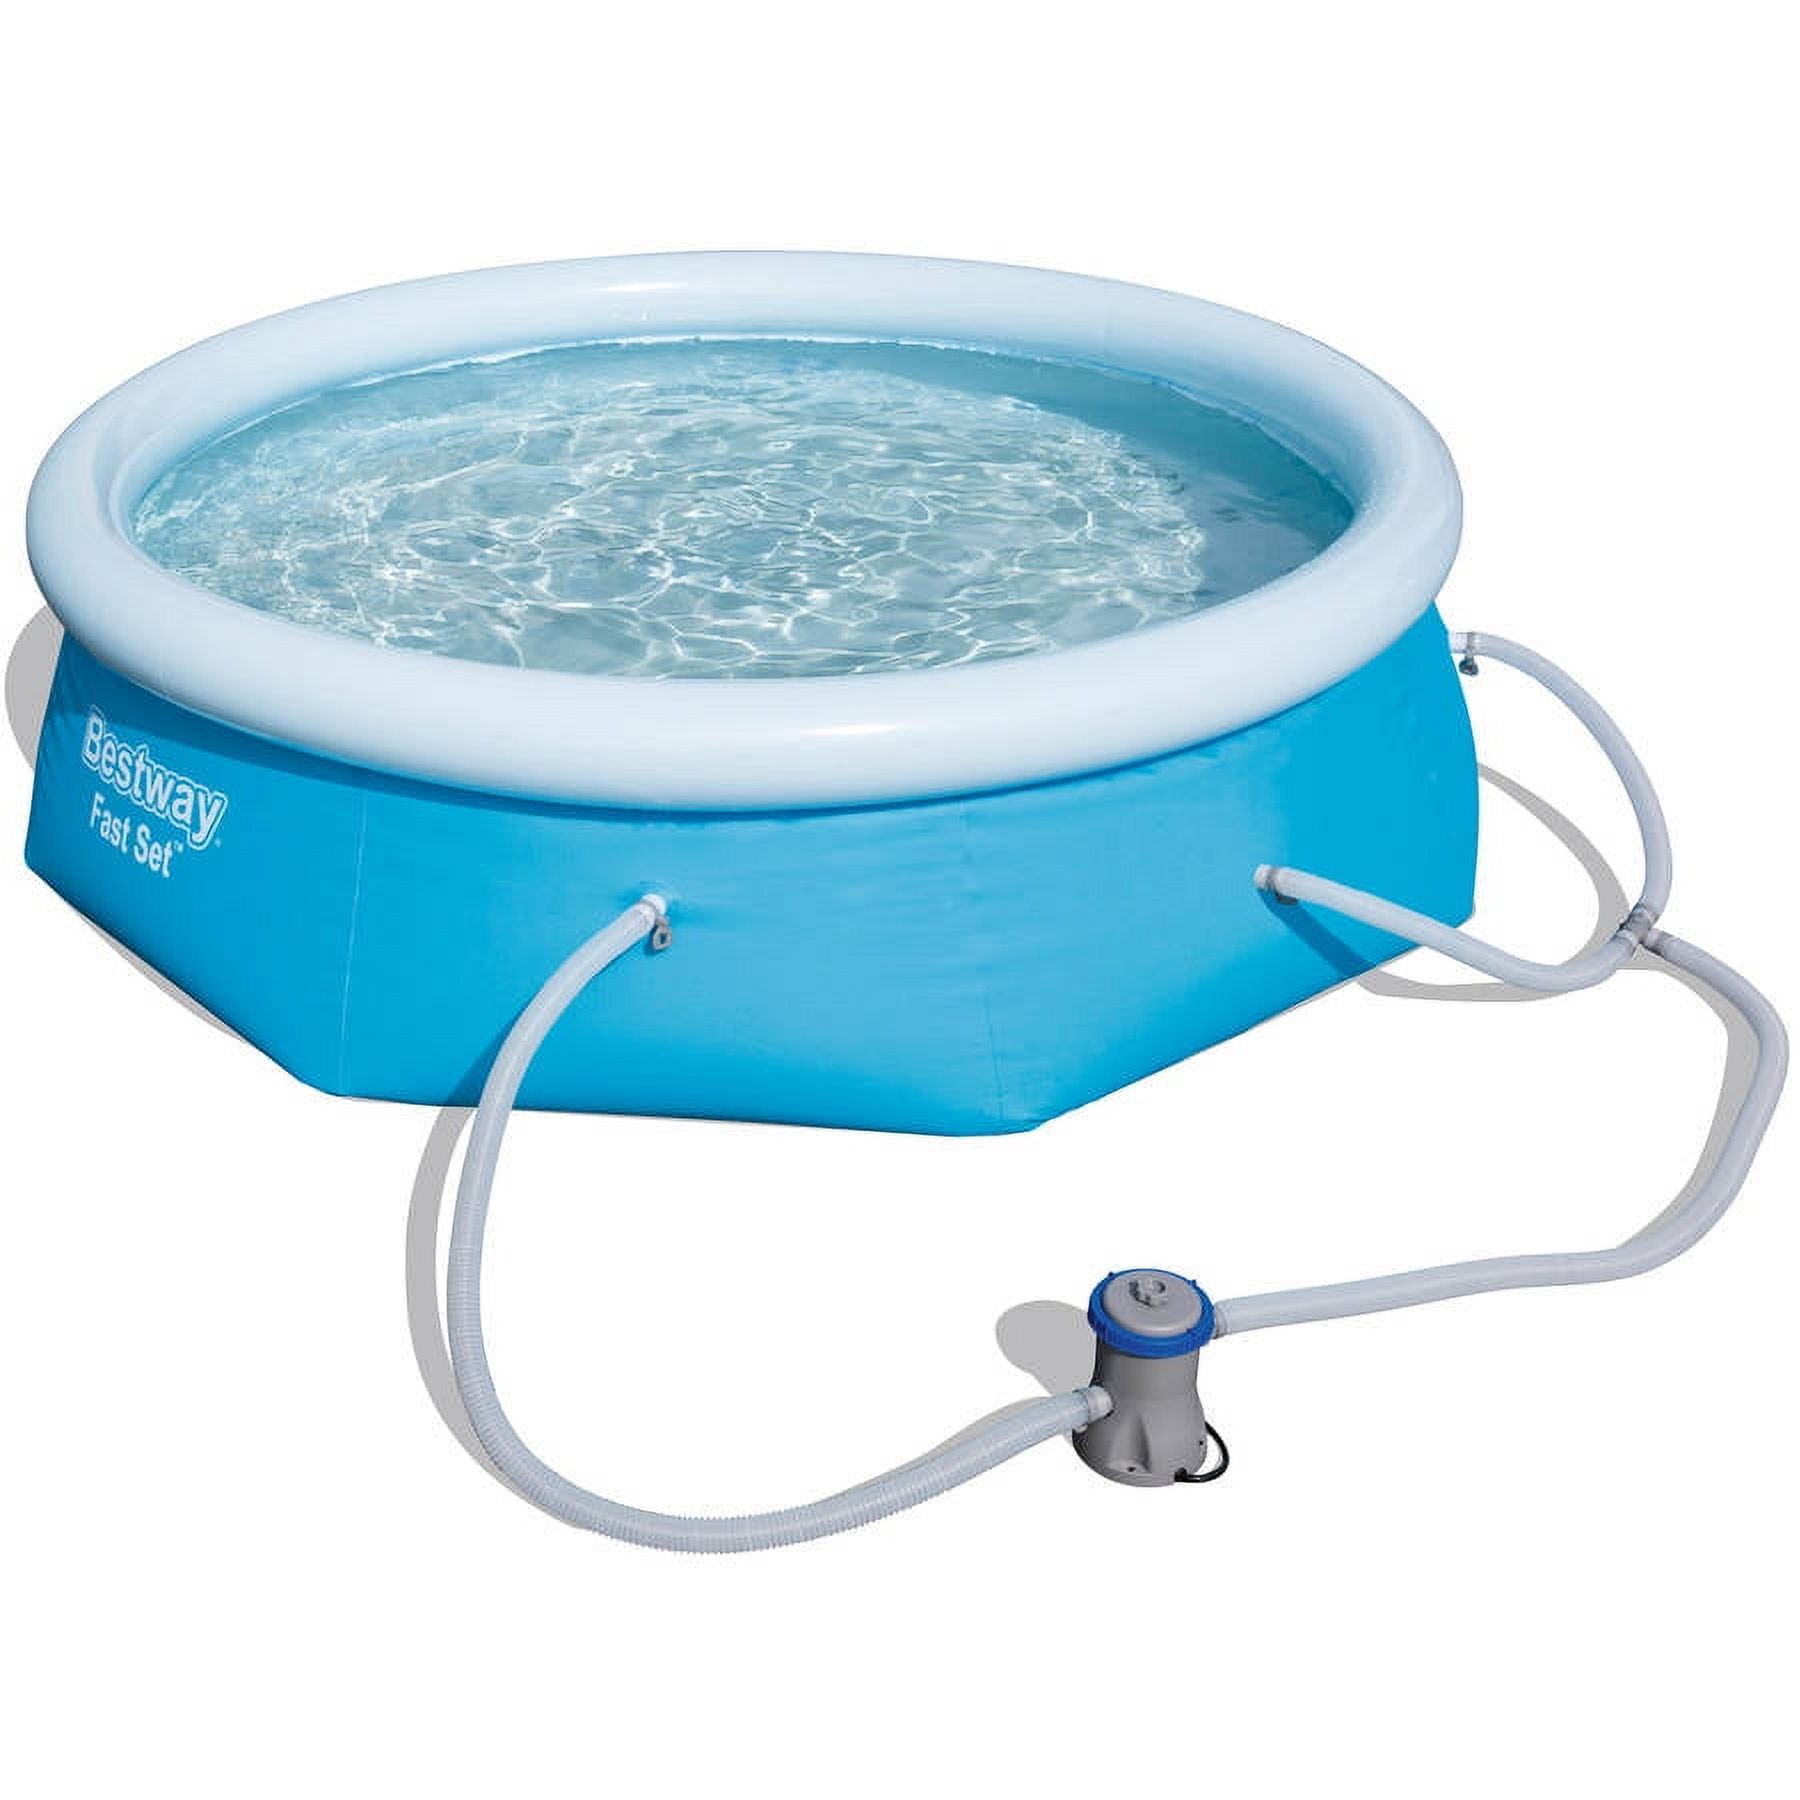 Bestway Fast Set 8' x 26" Swimming Pool Set with Filter Pump - image 1 of 5